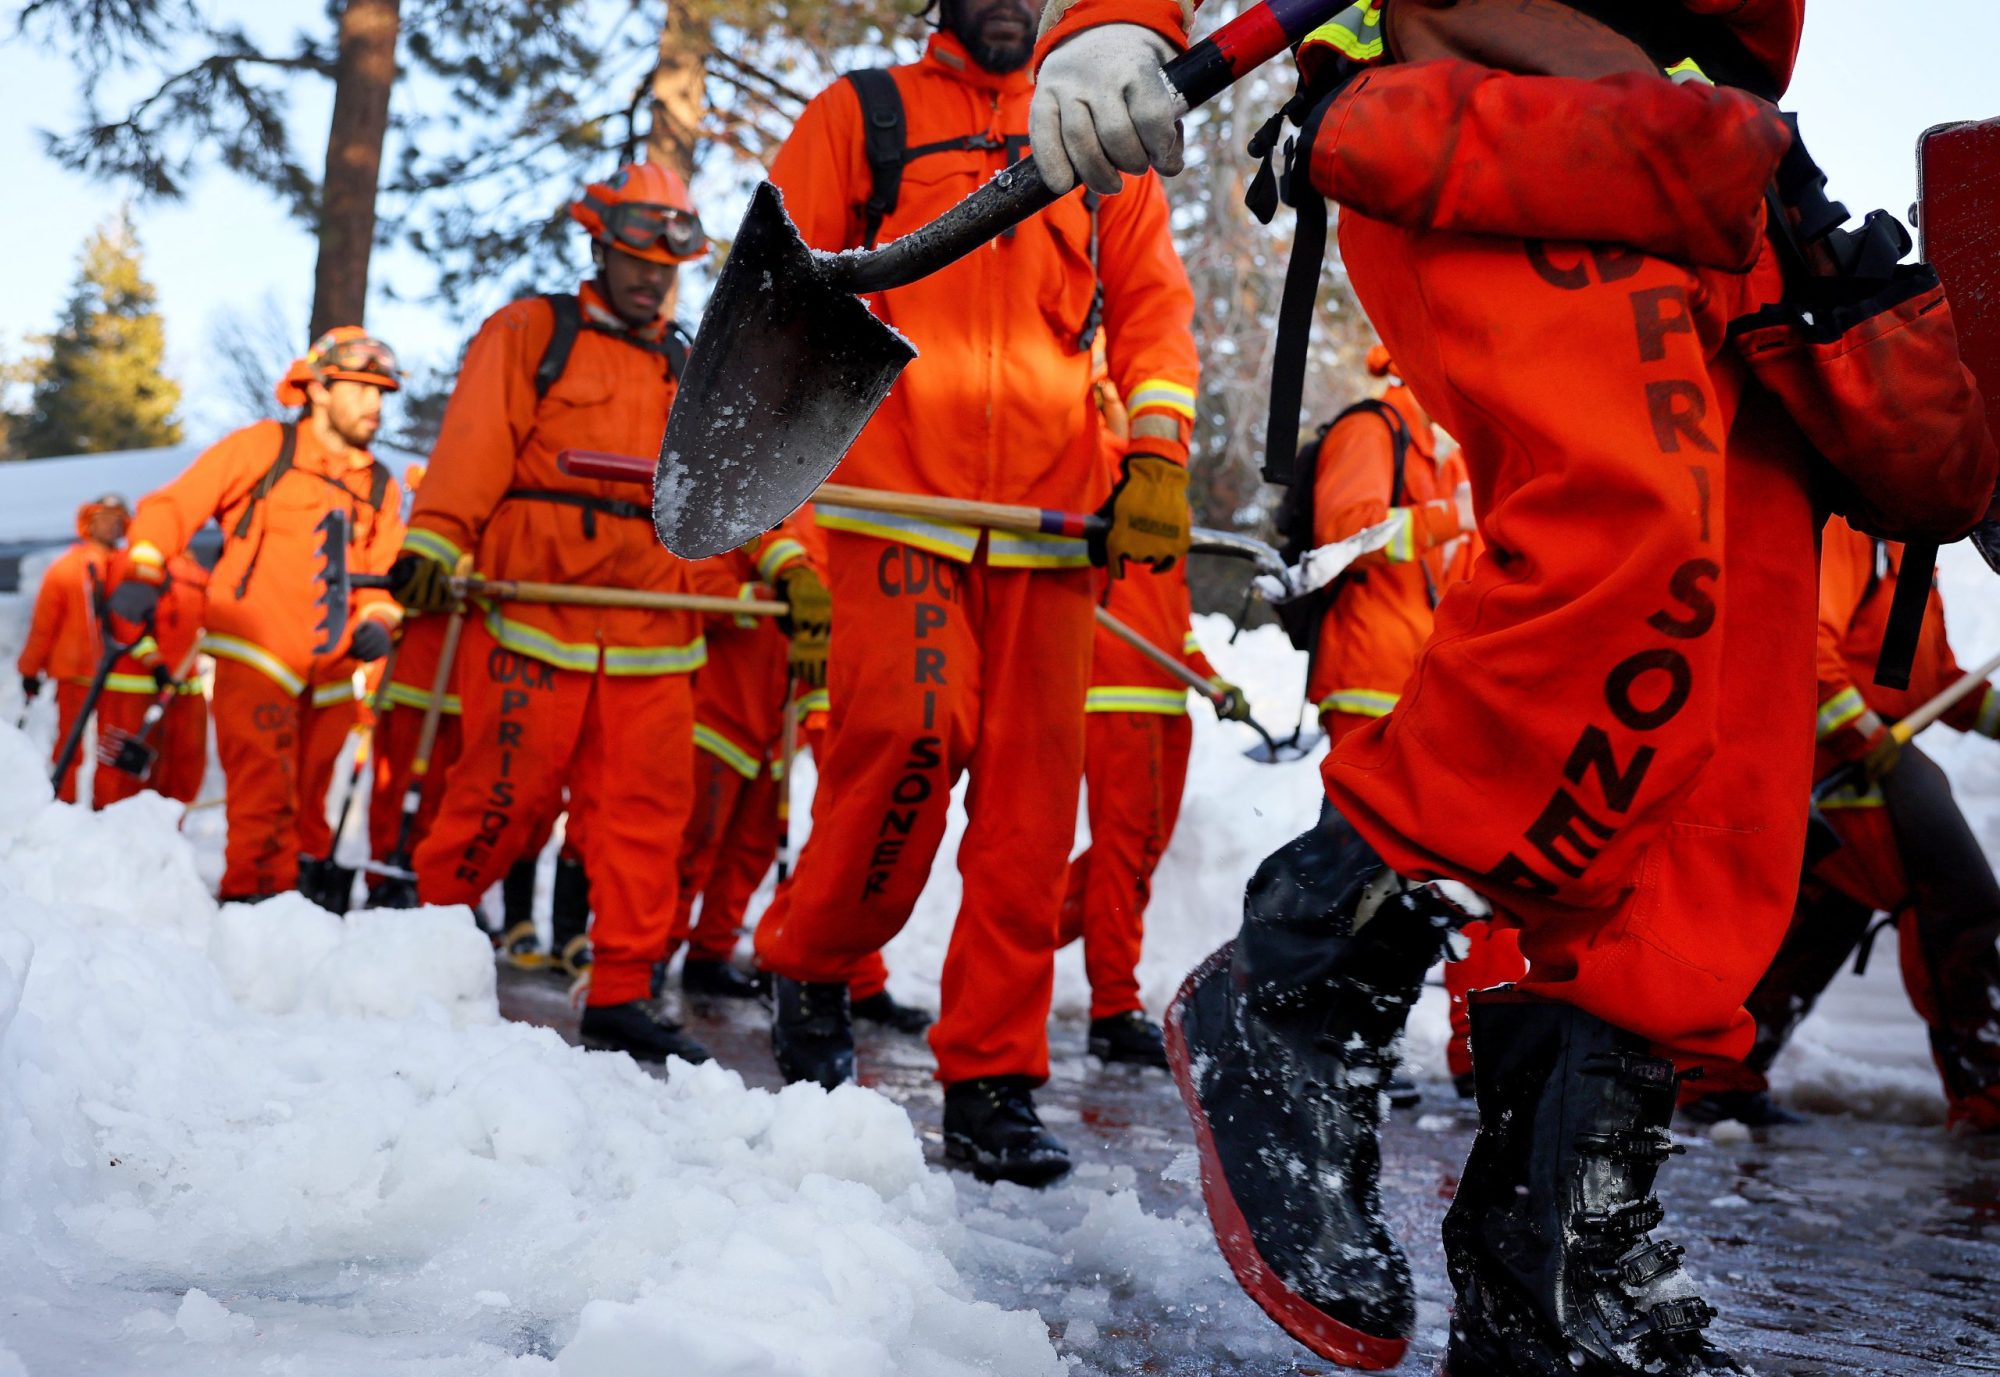 A crew of inmate firefighters walk back to their vehicle after shoveling and clearing snow after a series of winter storms in the San Bernardino Mountains in Southern California on March 3, 2023 in Crestline, California. Photo by Mario Tama/Getty Images